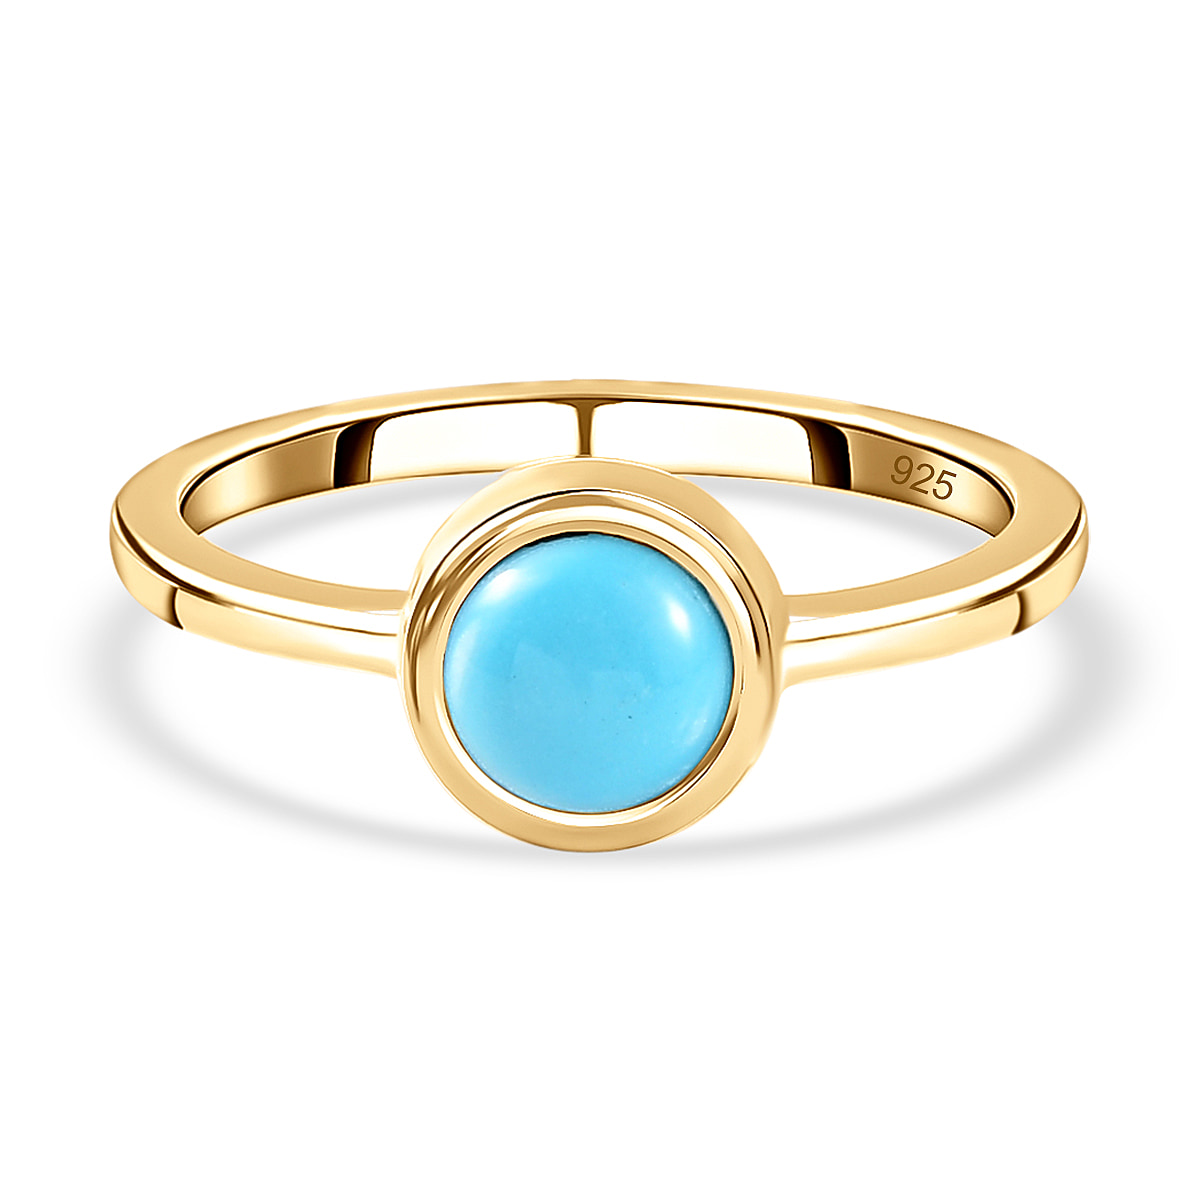 Arizona Sleeping Beauty Turquoise December Birthstone Solitaire Ring in 18K  Yellow Gold Vermeil Overlay Sterling Silver